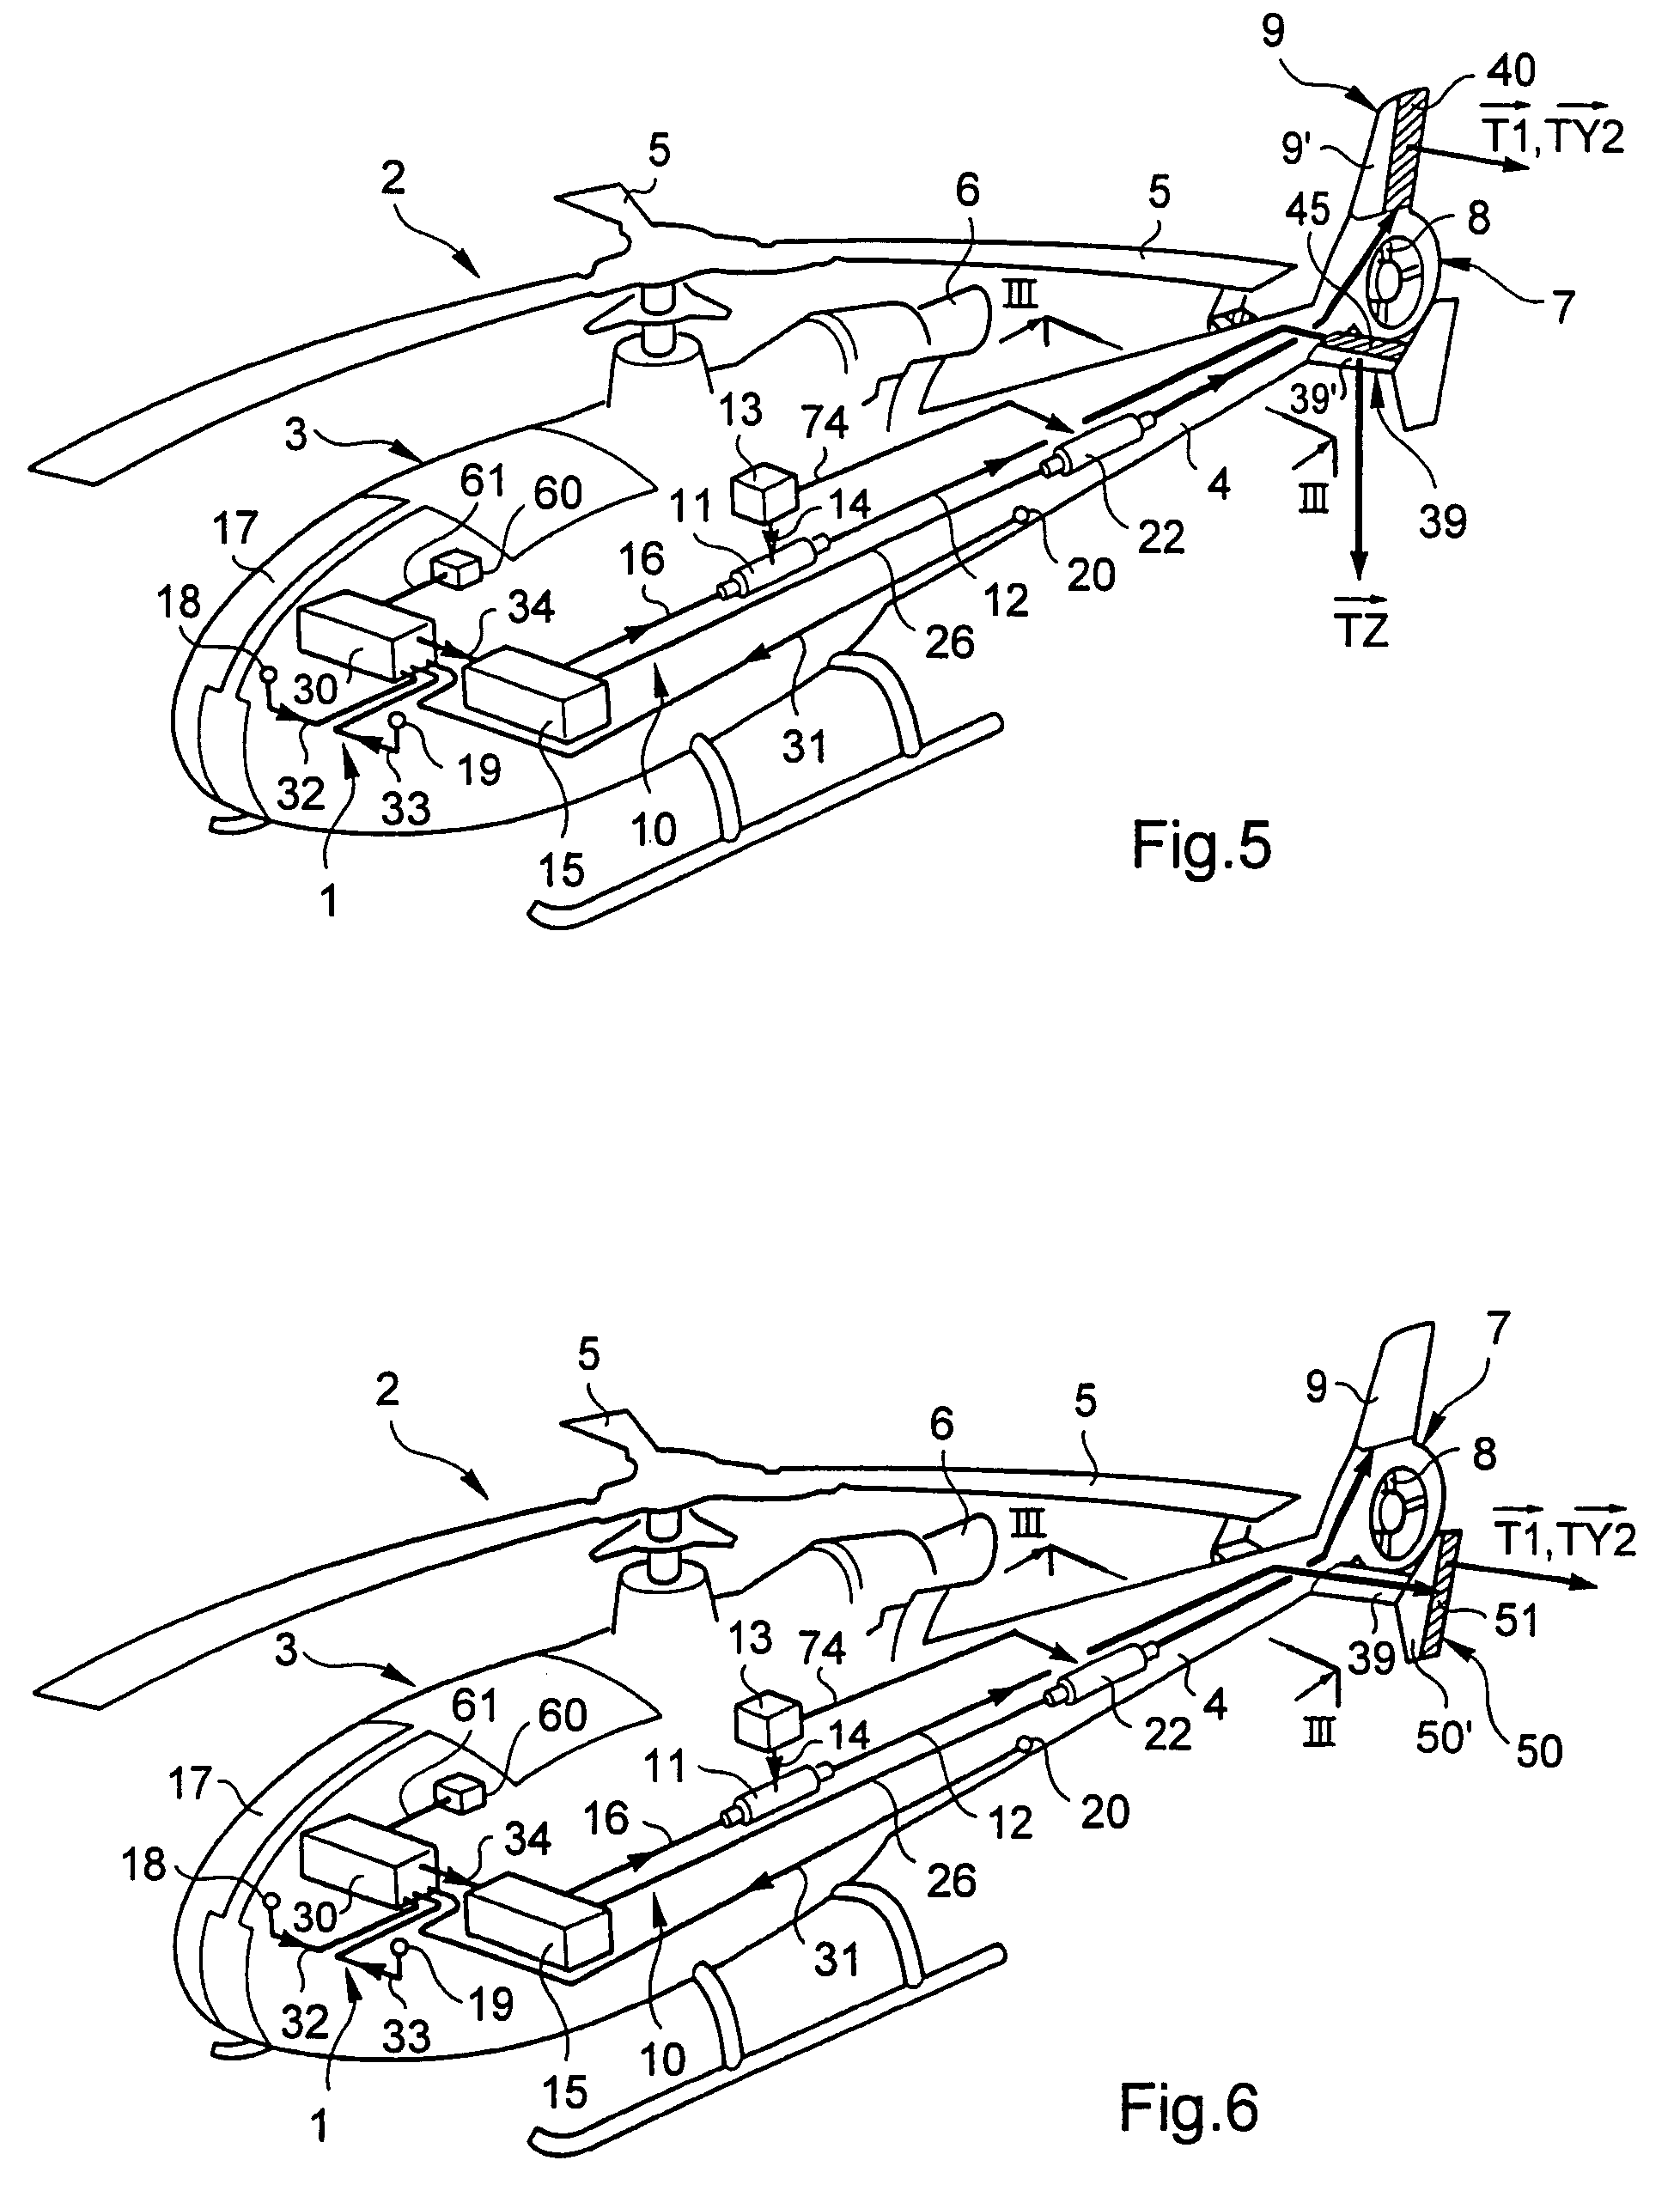 Method for using a tiltable stabilizer to reduce vibration generated on the fuselage of a helicopter